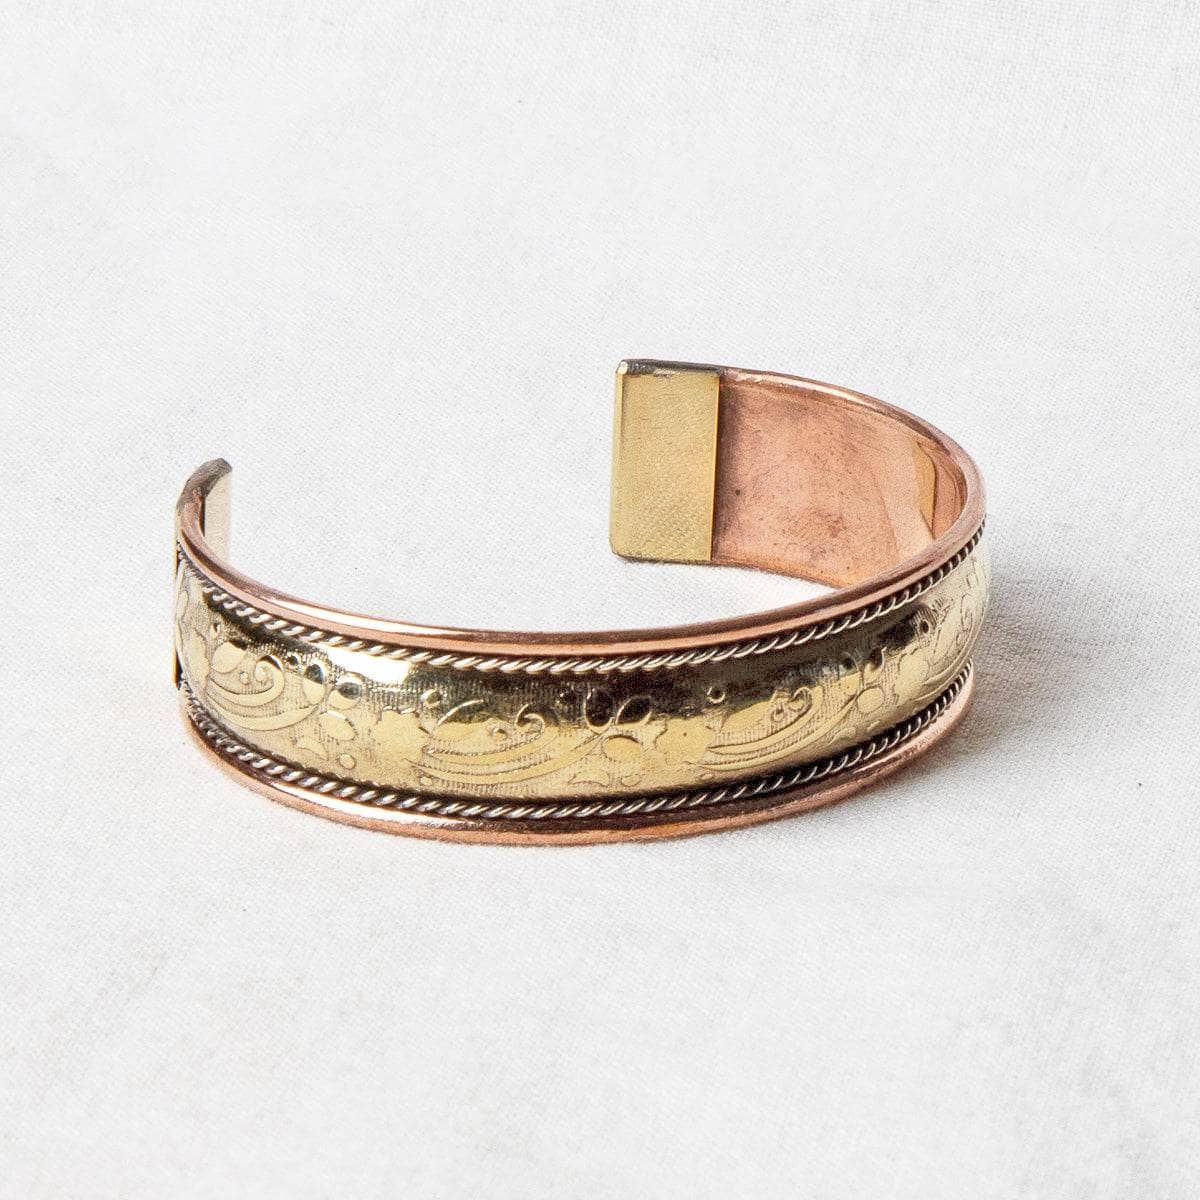 Tiny Rituals Tibetan Handcrafted Brass &amp; Copper Healing Bracelet by Tiny Rituals